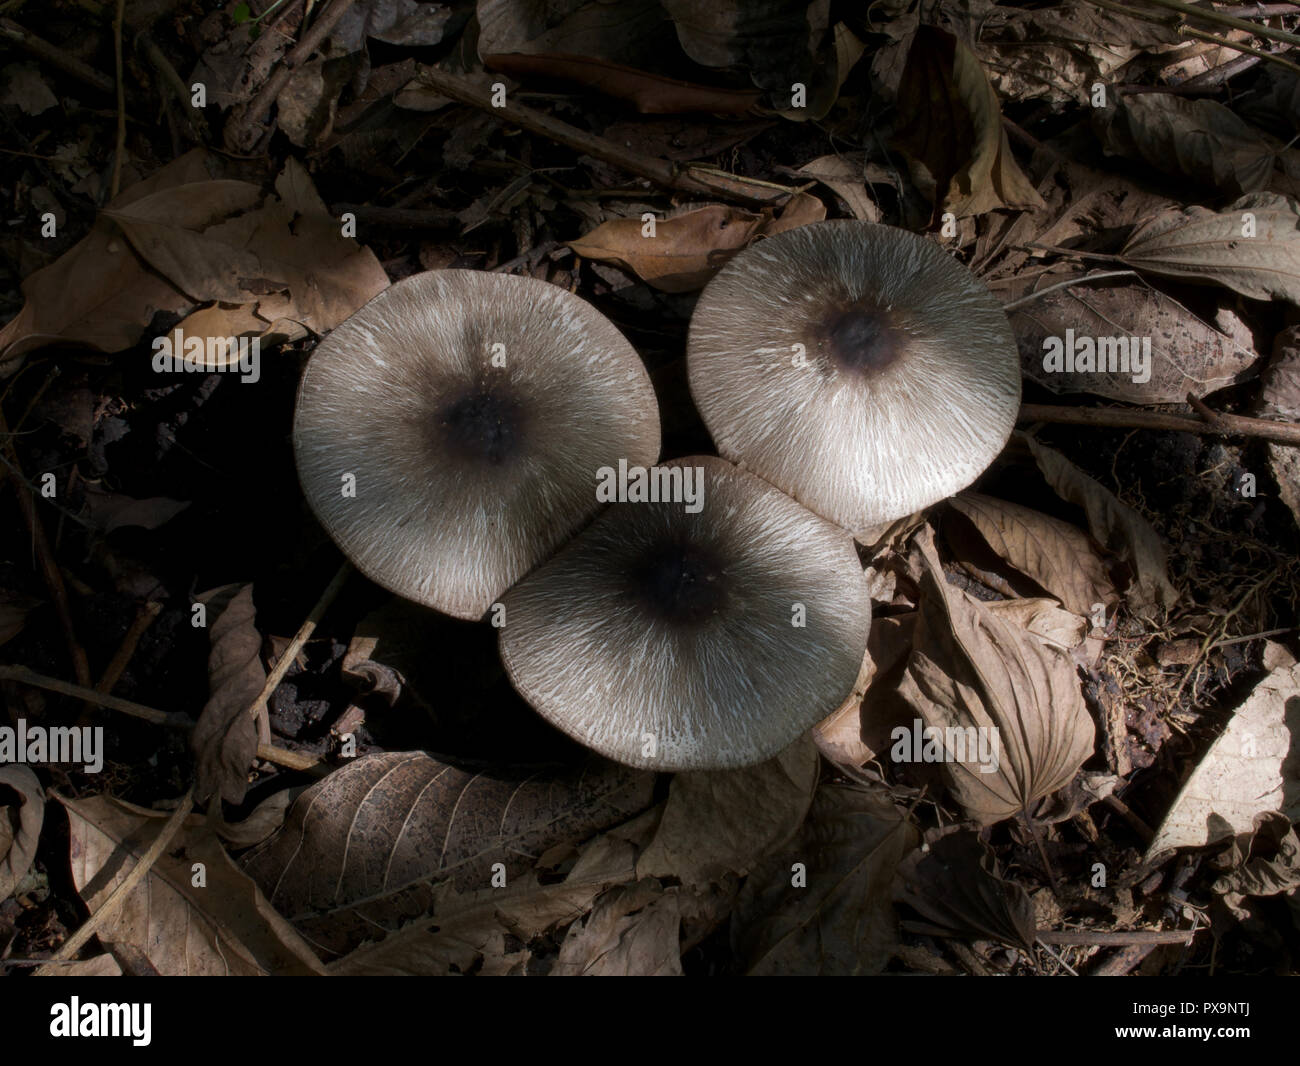 Three large wild mushrooms on the forest floor in a tropical jungle. Stock Photo